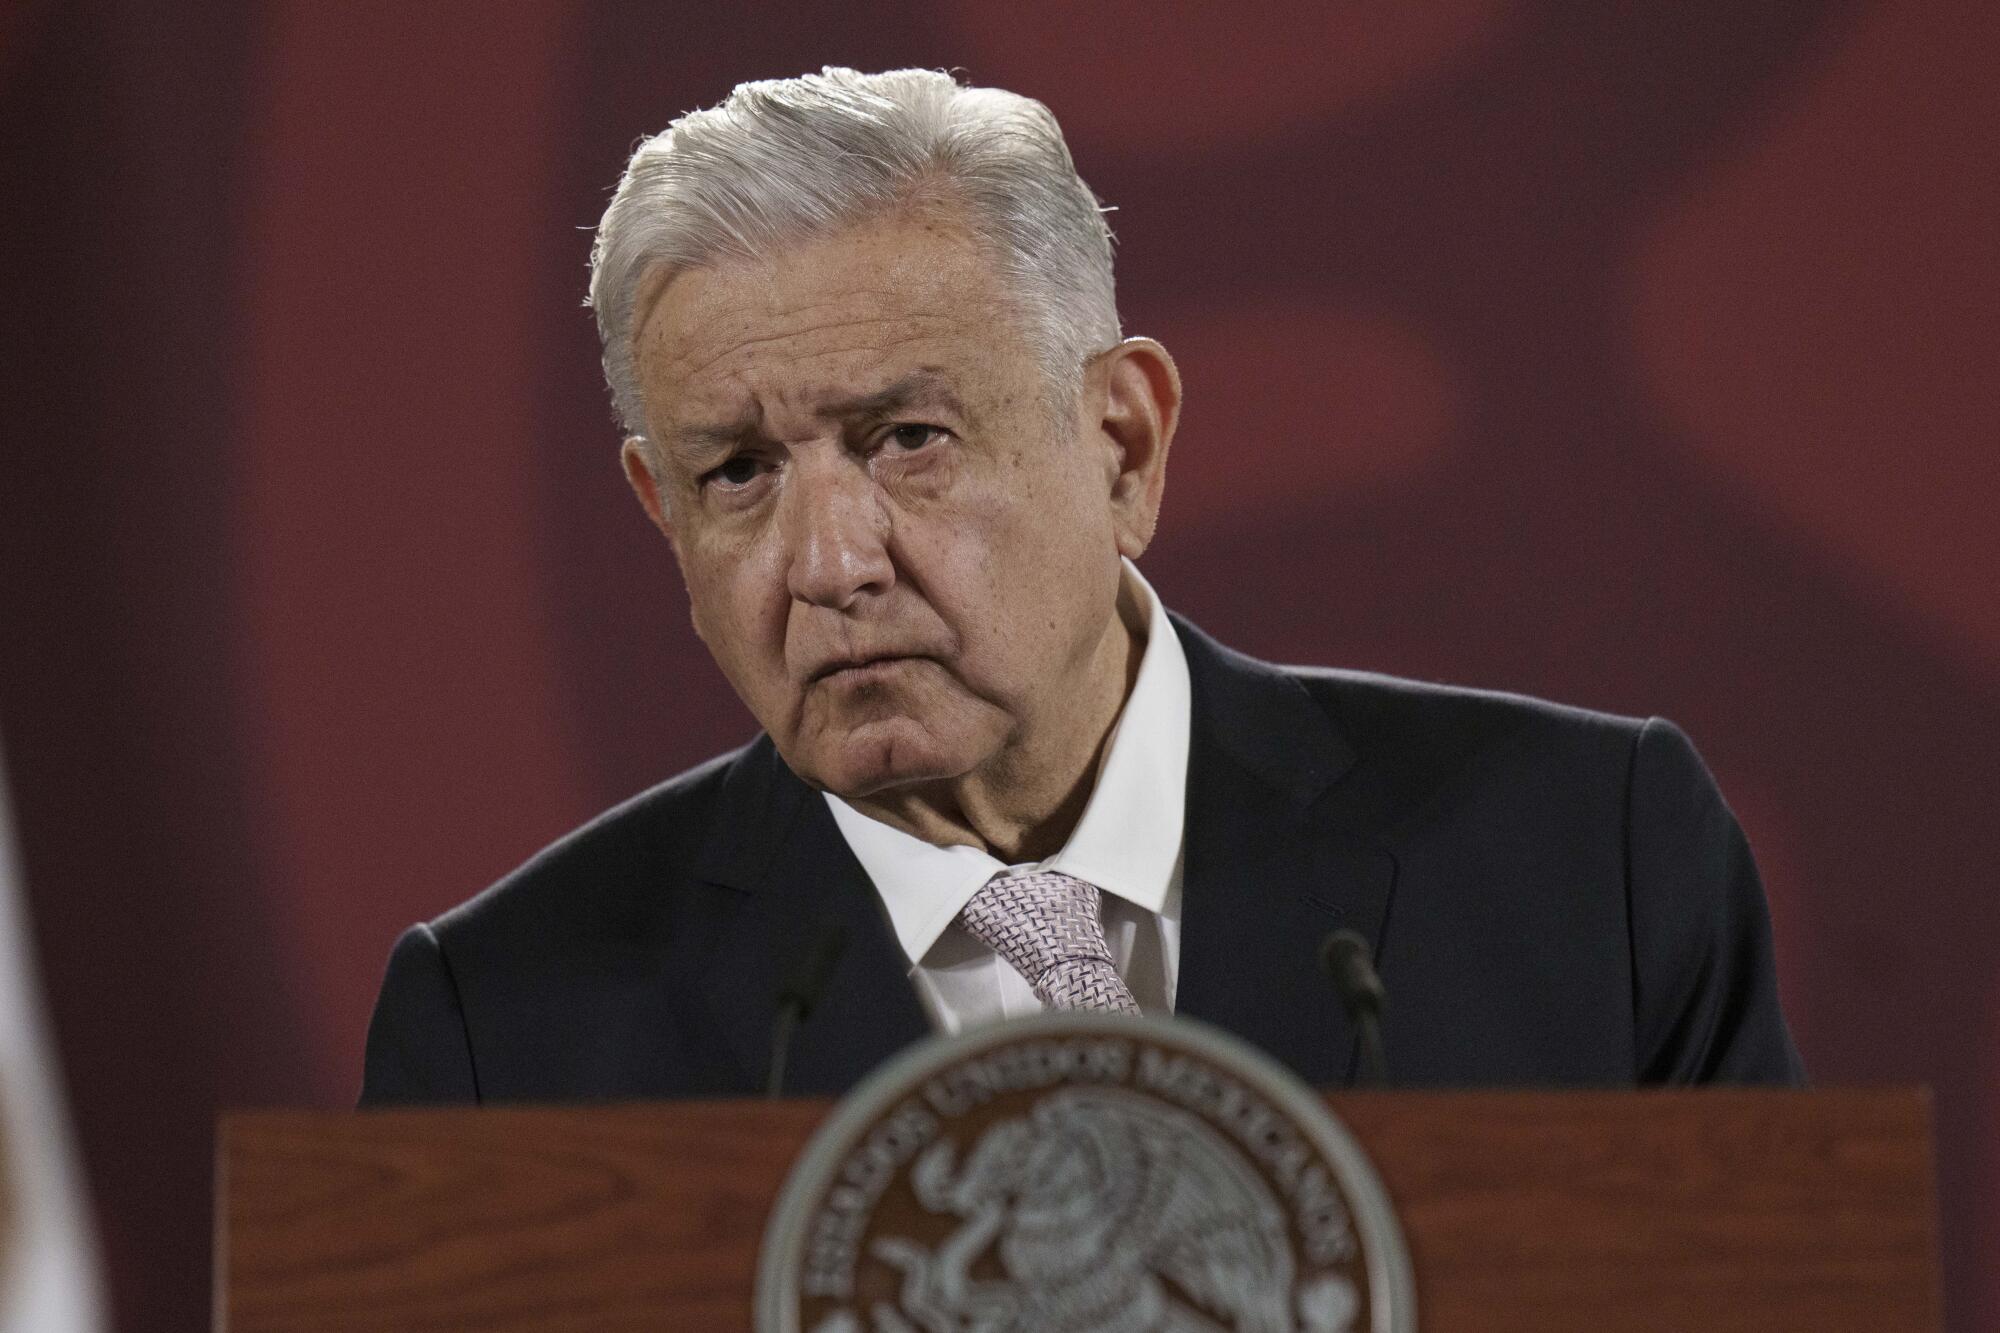 A man with gray hair, in a dark suit, looks out from a lectern 